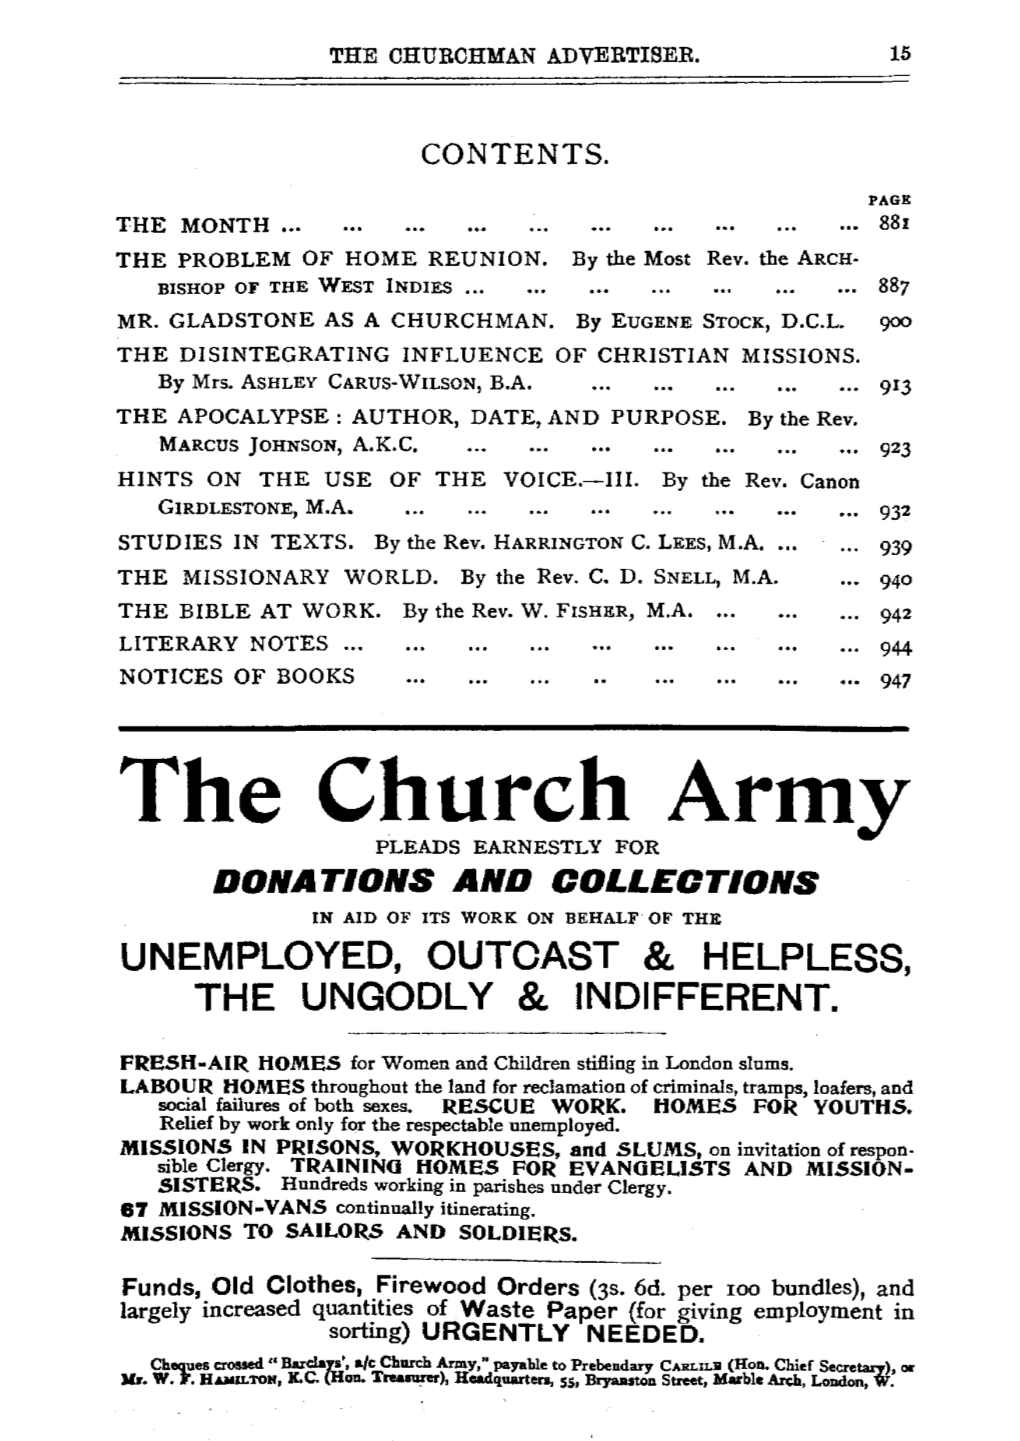 The Church Army PLEADS EARNESTLY for DONATIONS and COLLECTIONS in AID of ITS WORK on BEHALF of the UNEMPLOYED, OUTCAST & HELPLESS, the UNGODLY & INDIFFERENT